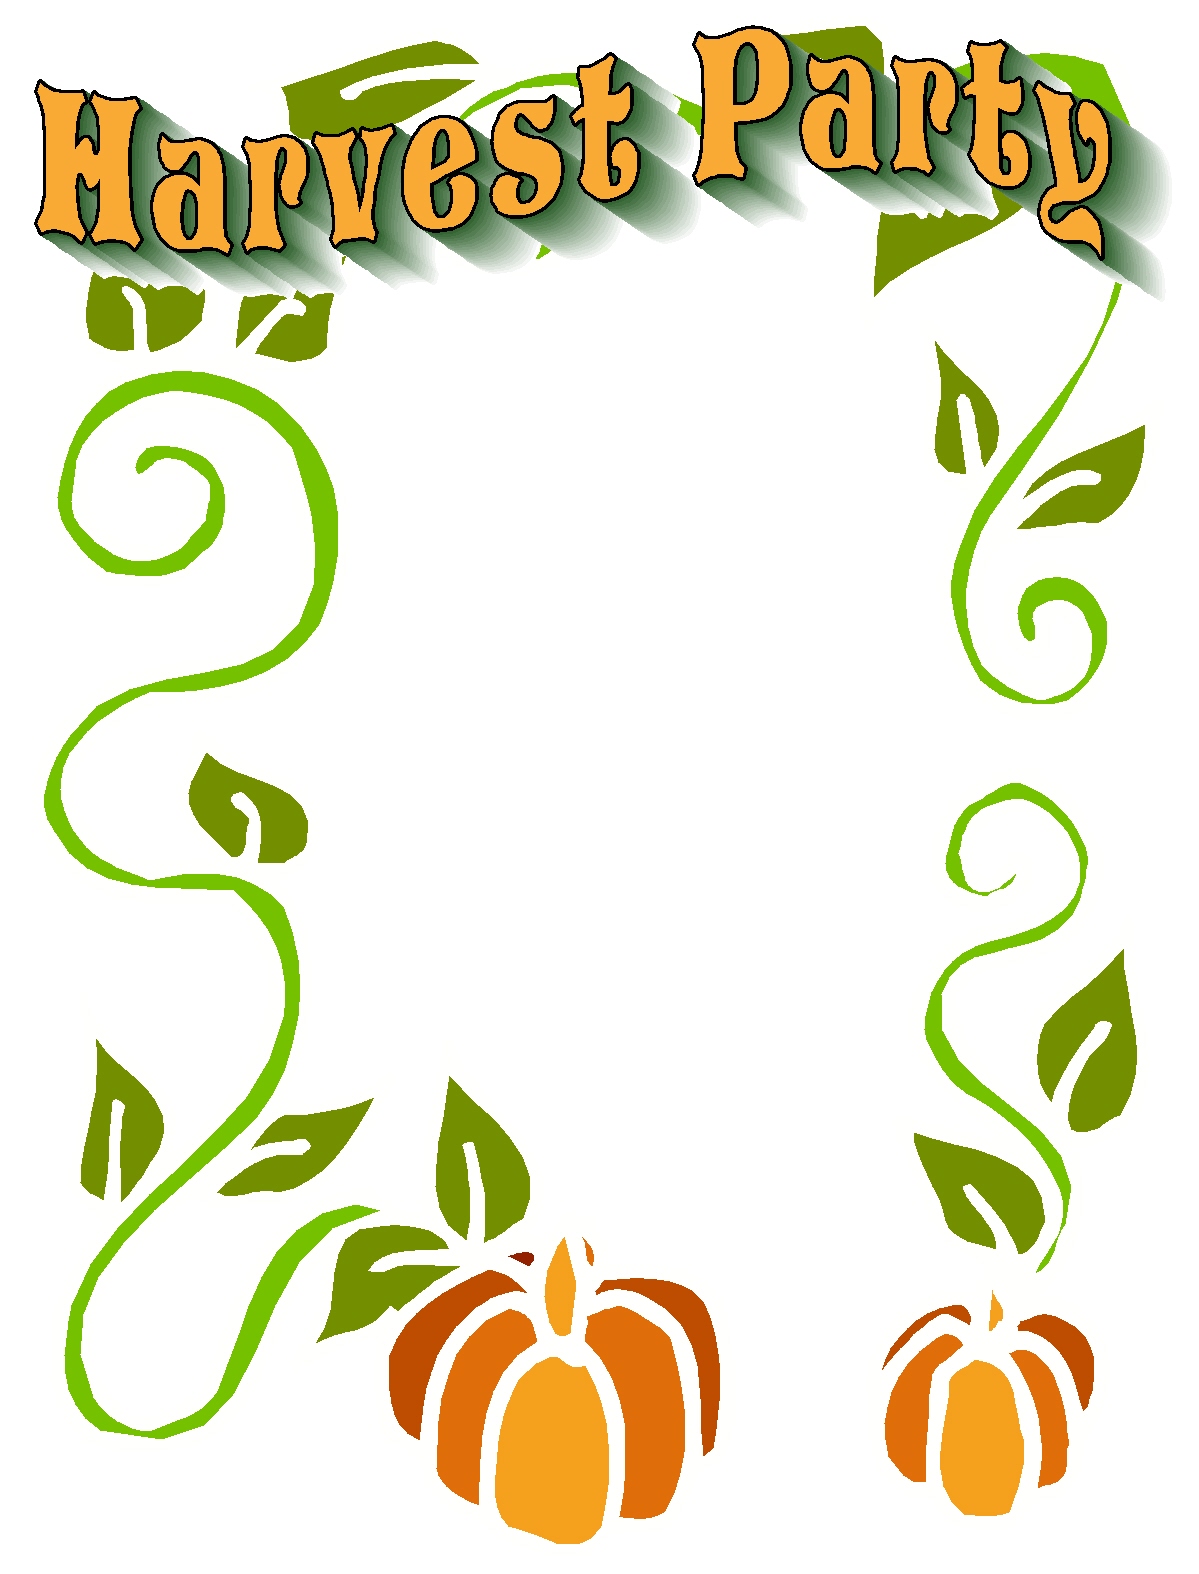 Christian Images In My Treasure Box  Fall Activity Flyer Starters